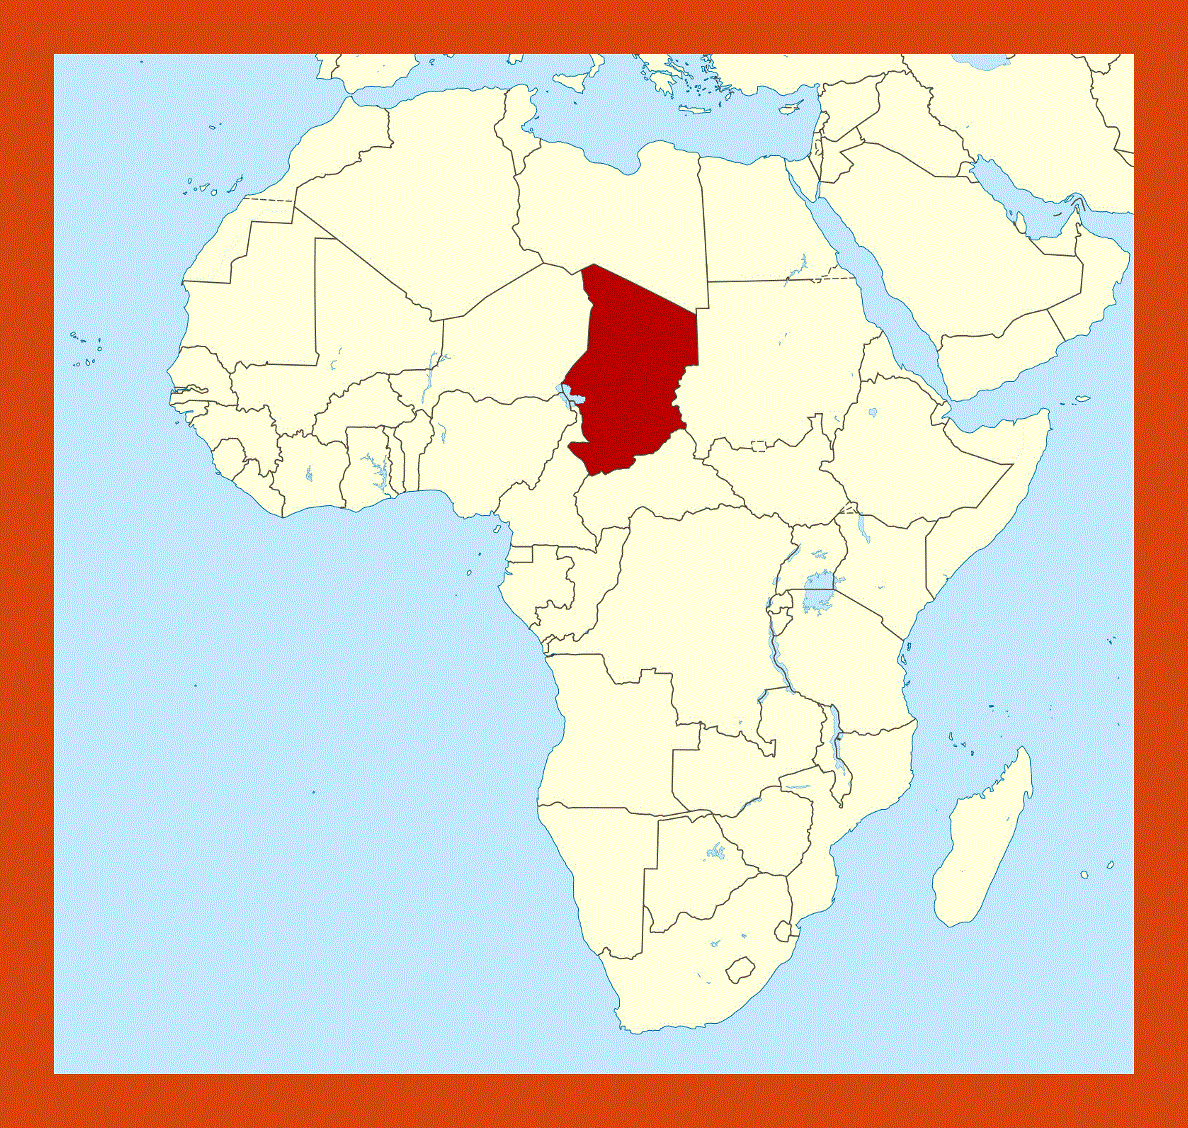 Location map of Chad in Africa